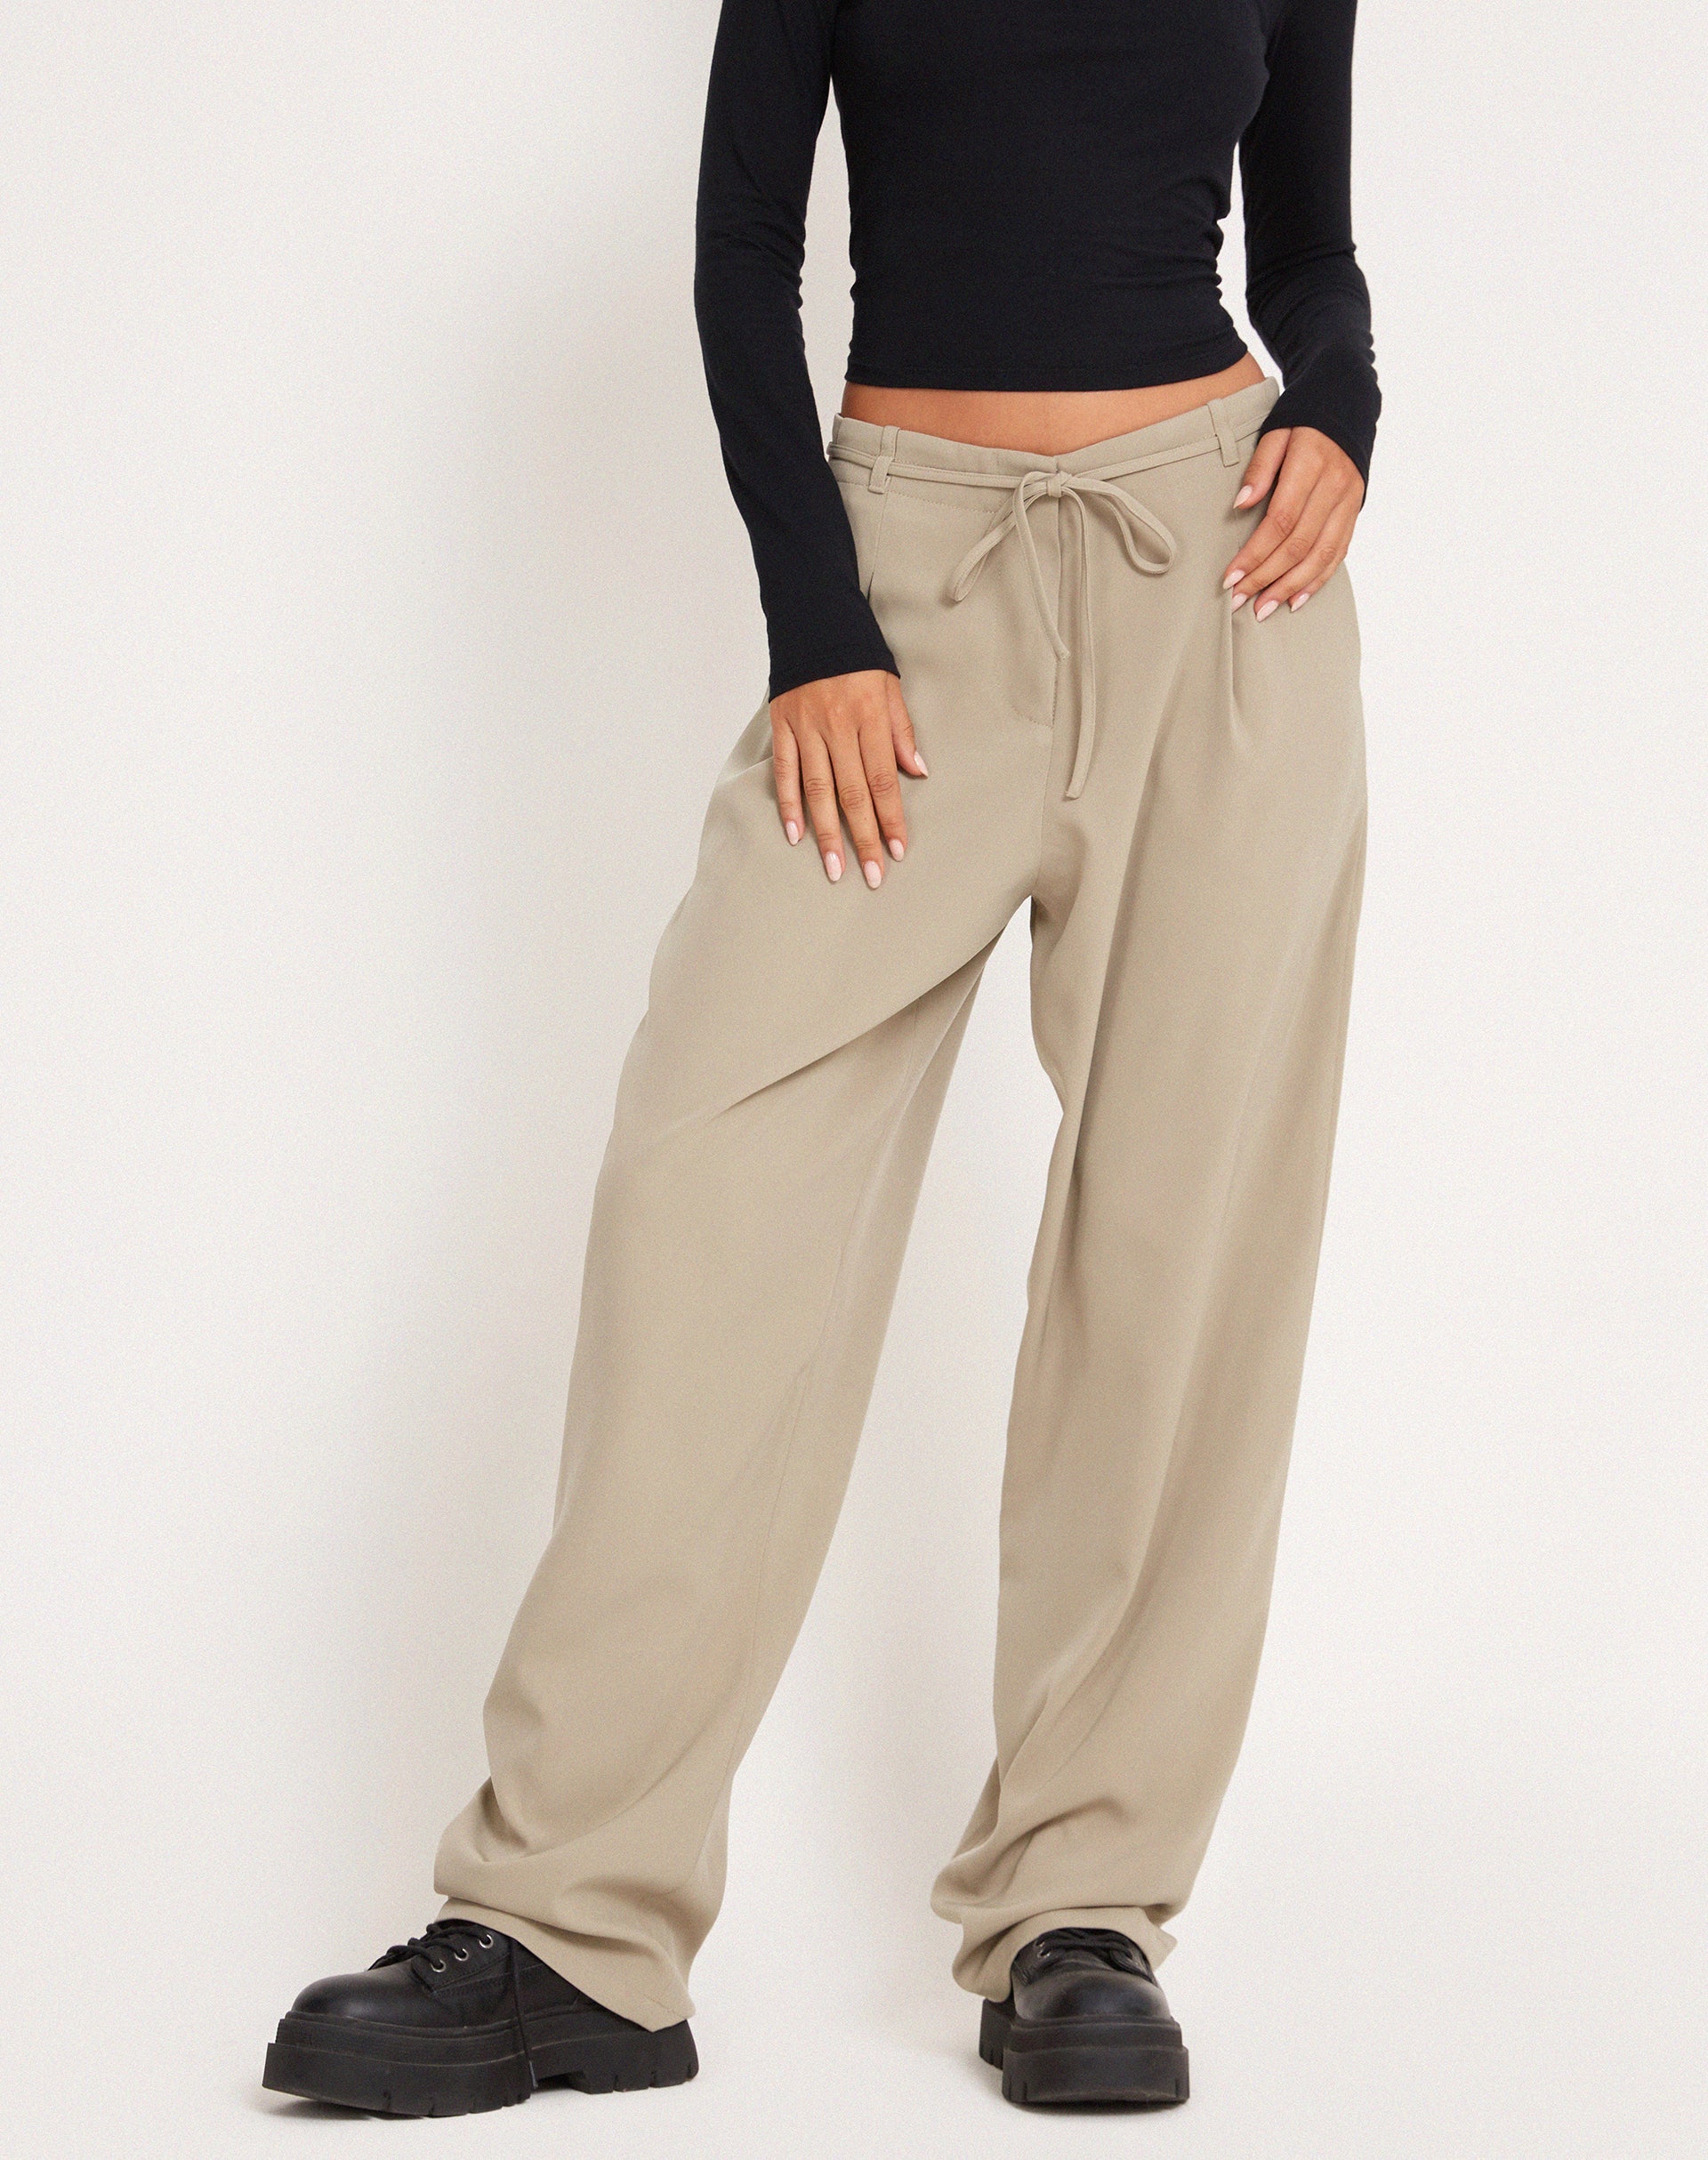 image of Sabria Trouser in Tailoring Taupe